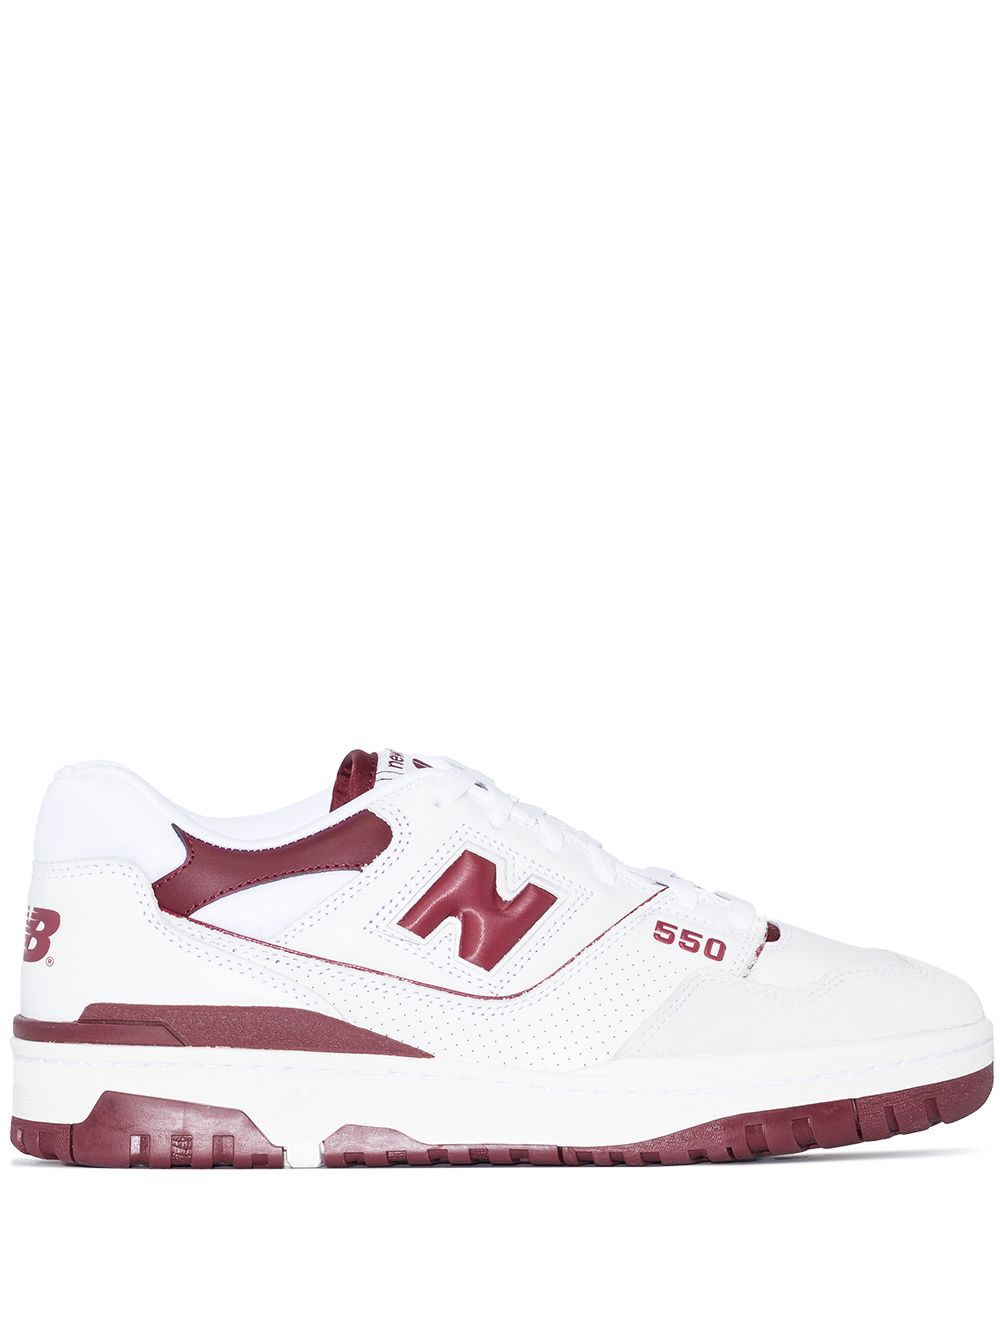 New Balance 550 "Burgundy" low-top sneakers - White